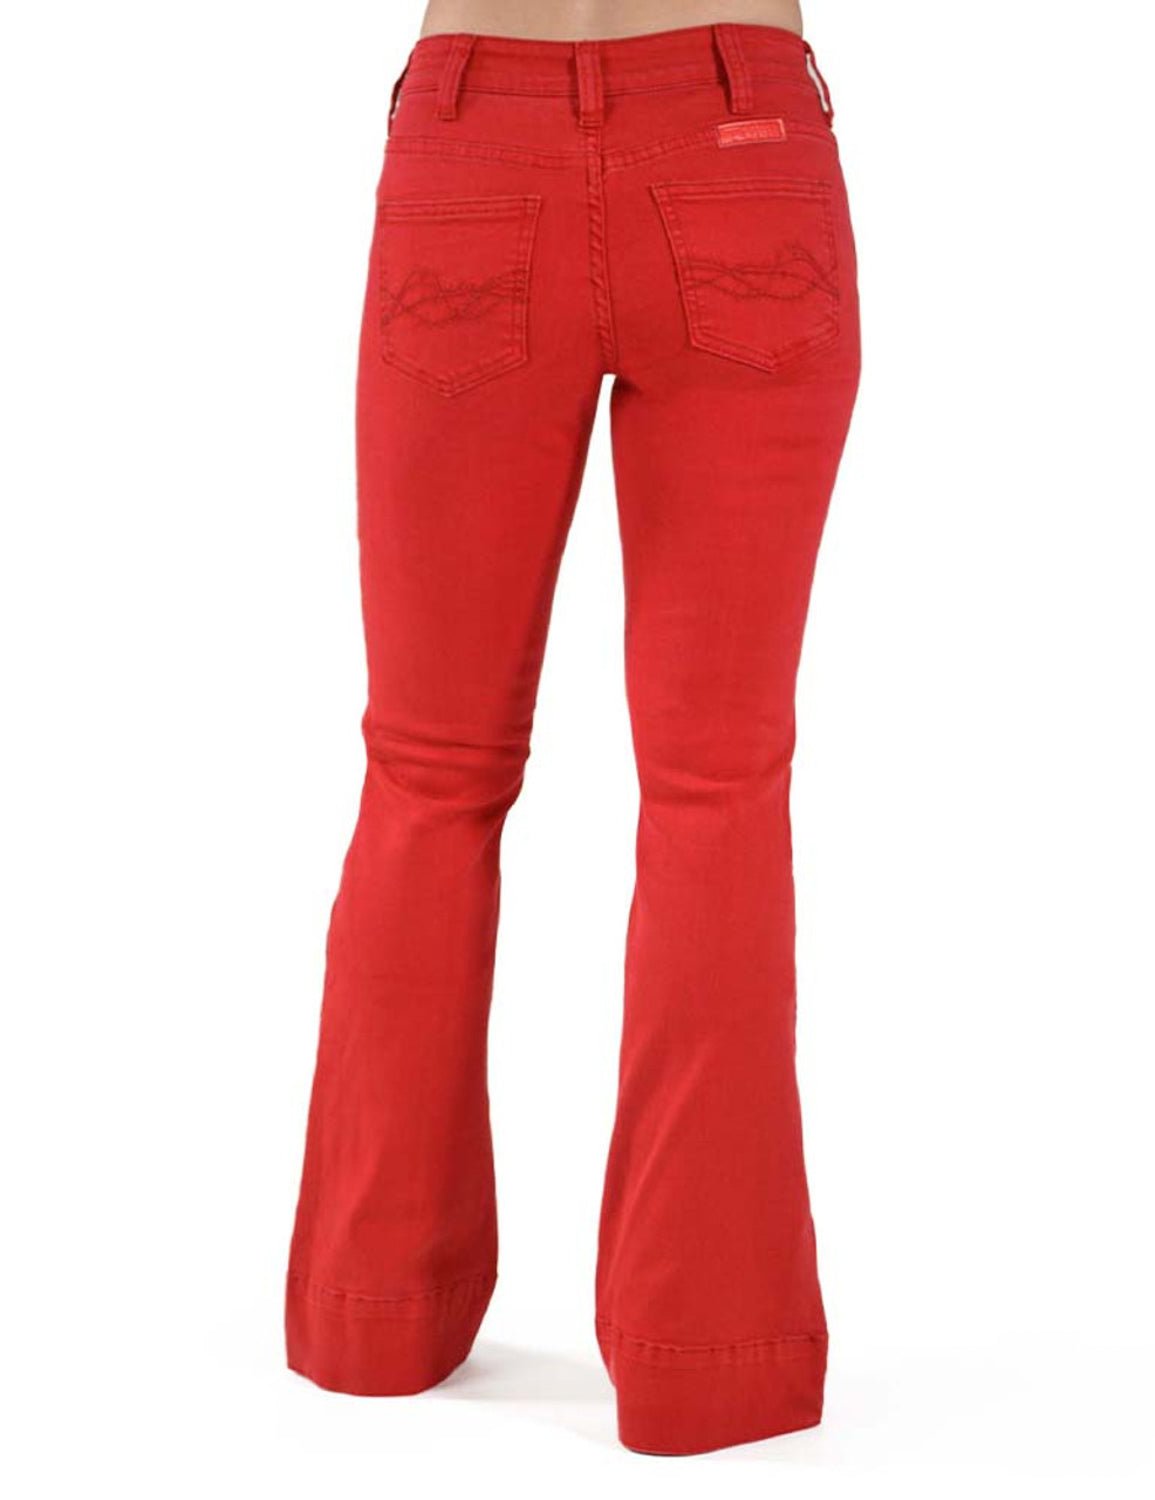 Cowgirl Tuff Womens Hot Trouser Red Cotton Blend Jeans The Western Company